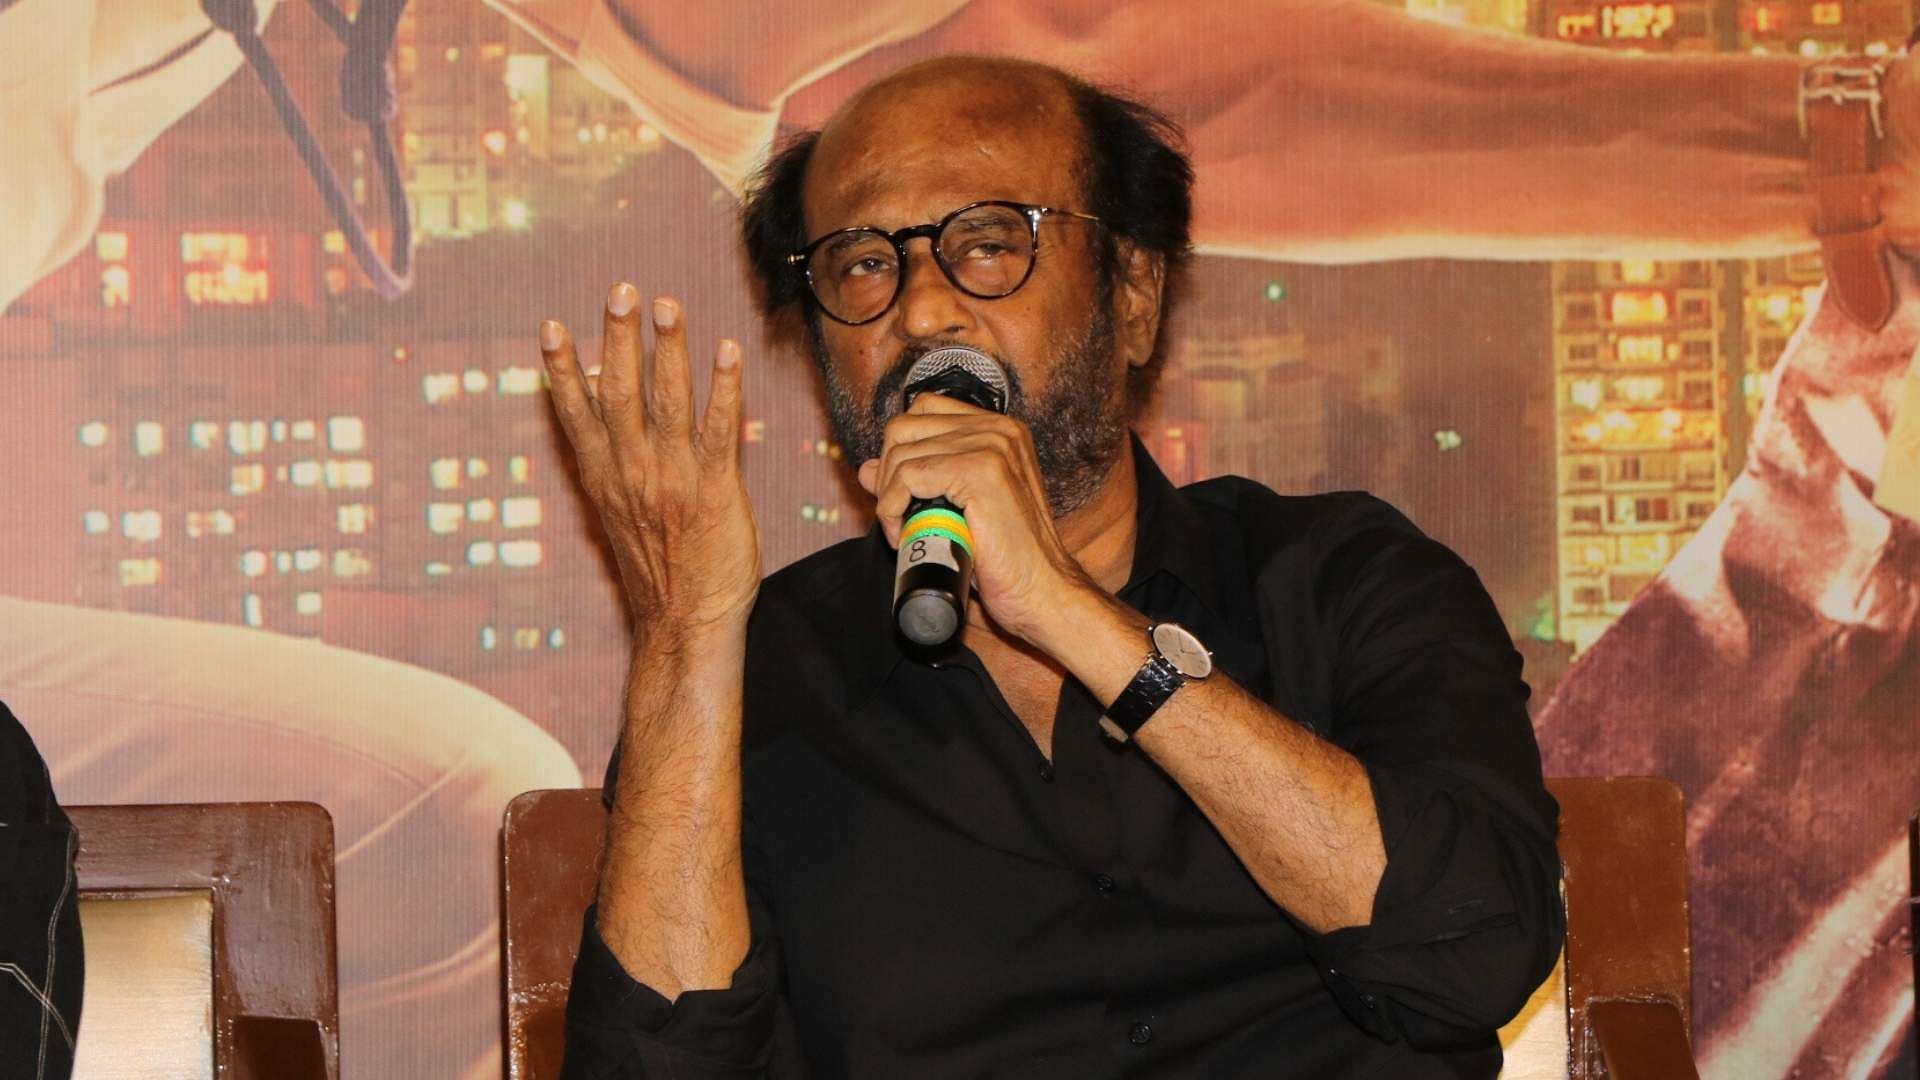 Rajinikanth is reportedly expected to make an announcement later on Monday or on Tuesday regarding his political future.